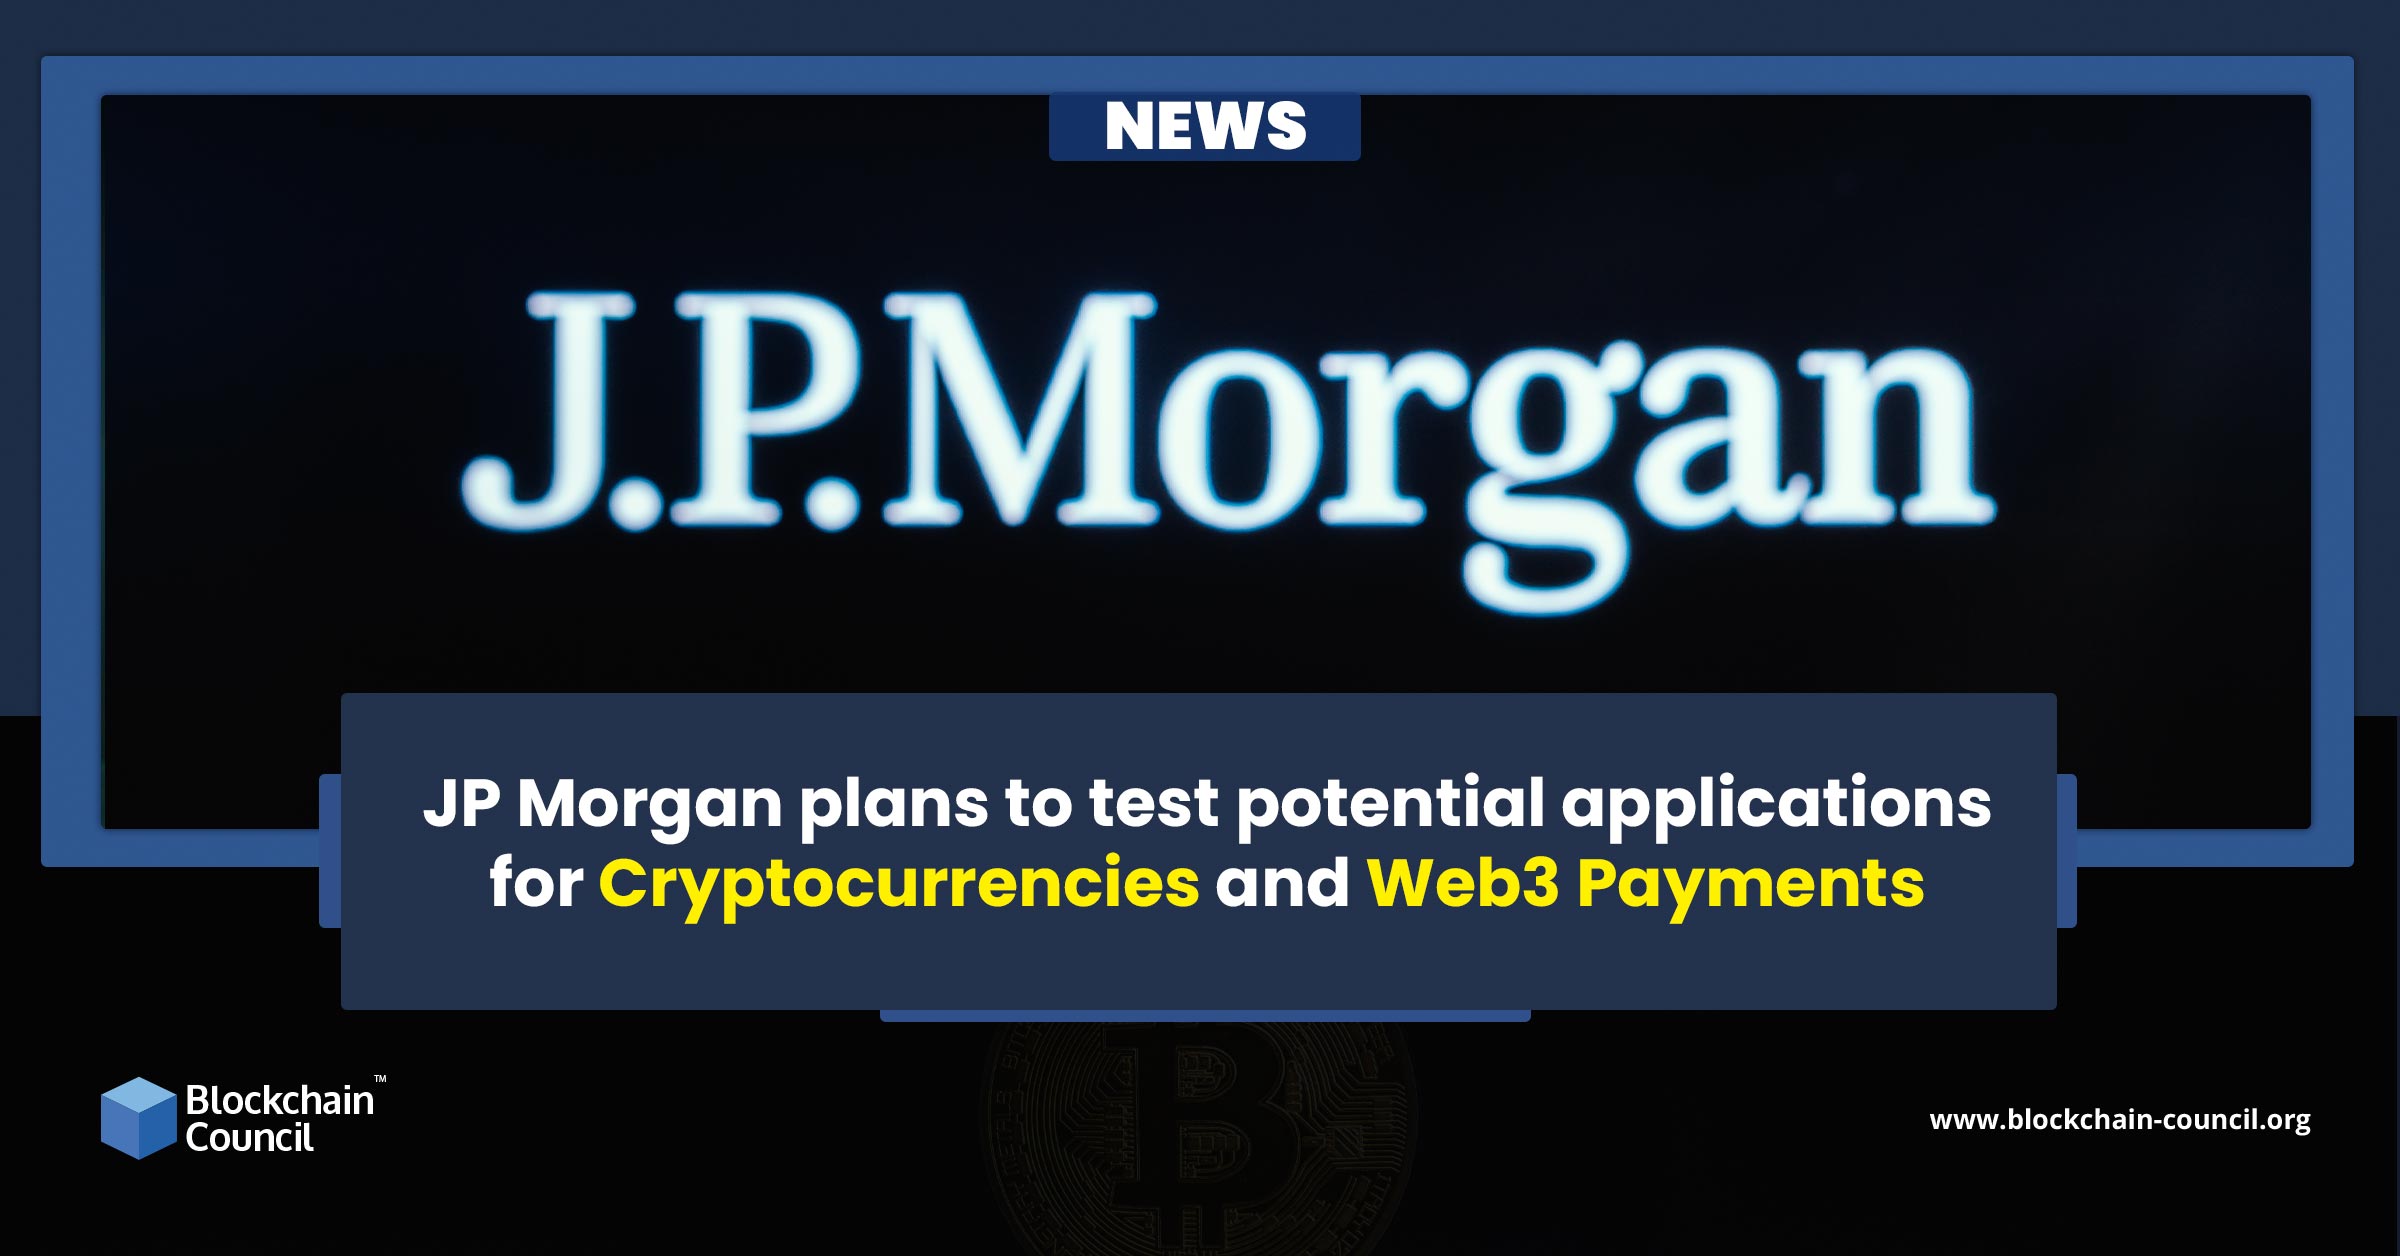 JP Morgan plans to test potential applications for Cryptocurrencies and Web3 Payments